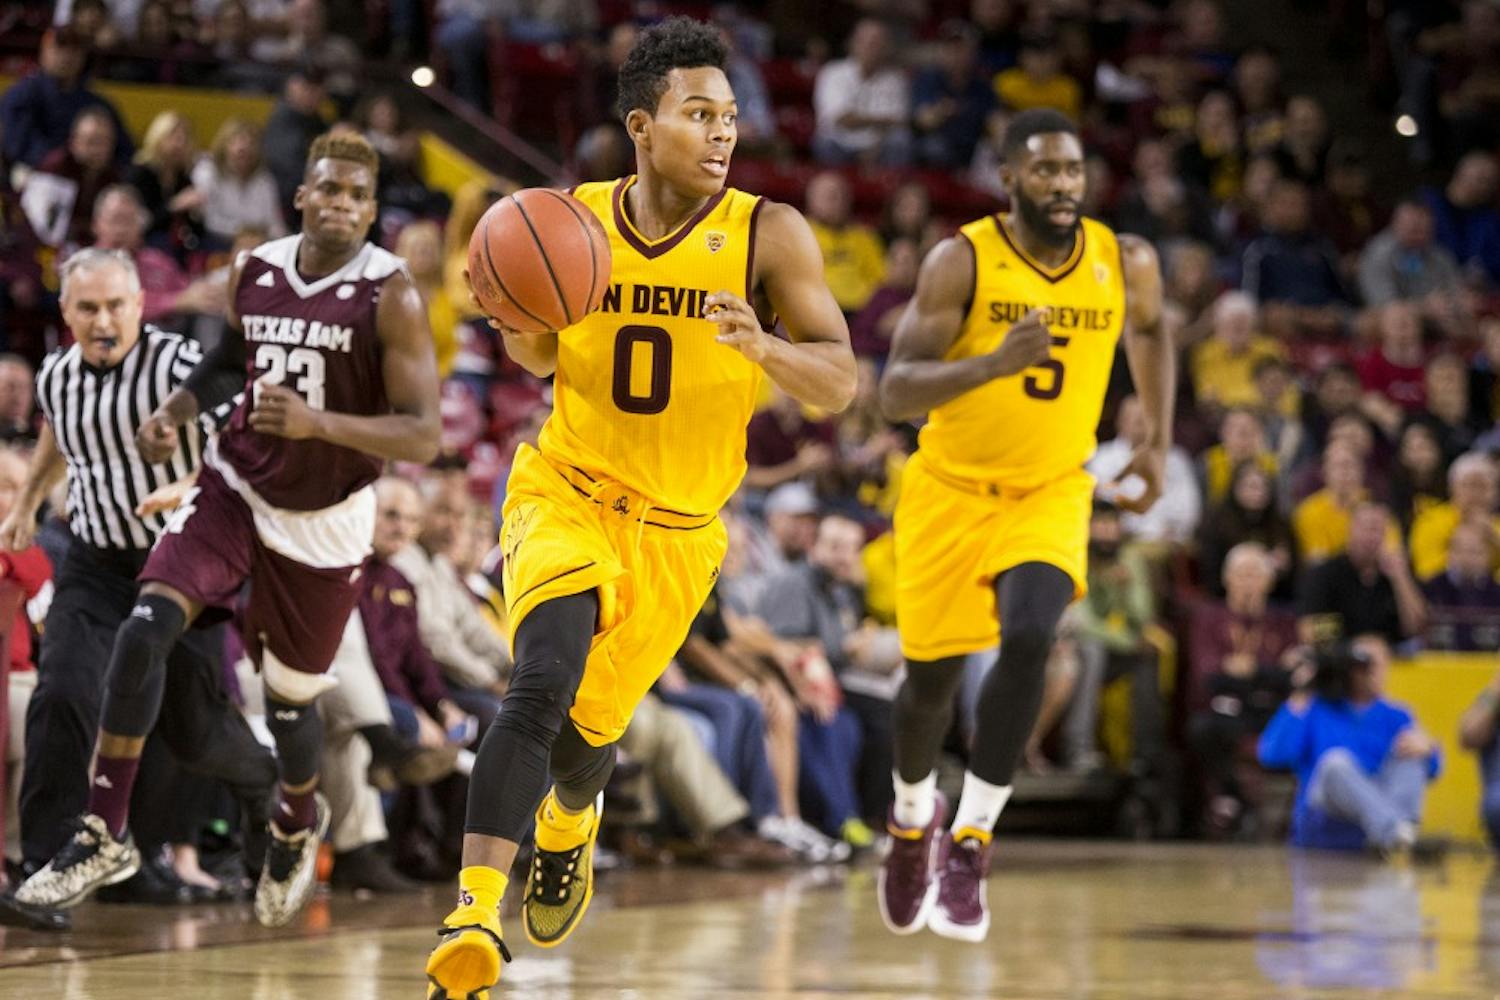 Arizona State Sun Devils guard Tra Holder makes his way up the court during a game against Texas A&M at Wells Fargo Arena in Tempe, Ariz., on Saturday, Dec. 5, 2015. The ASU Sun Devils took down the Texas A&M Aggies 67-54. 